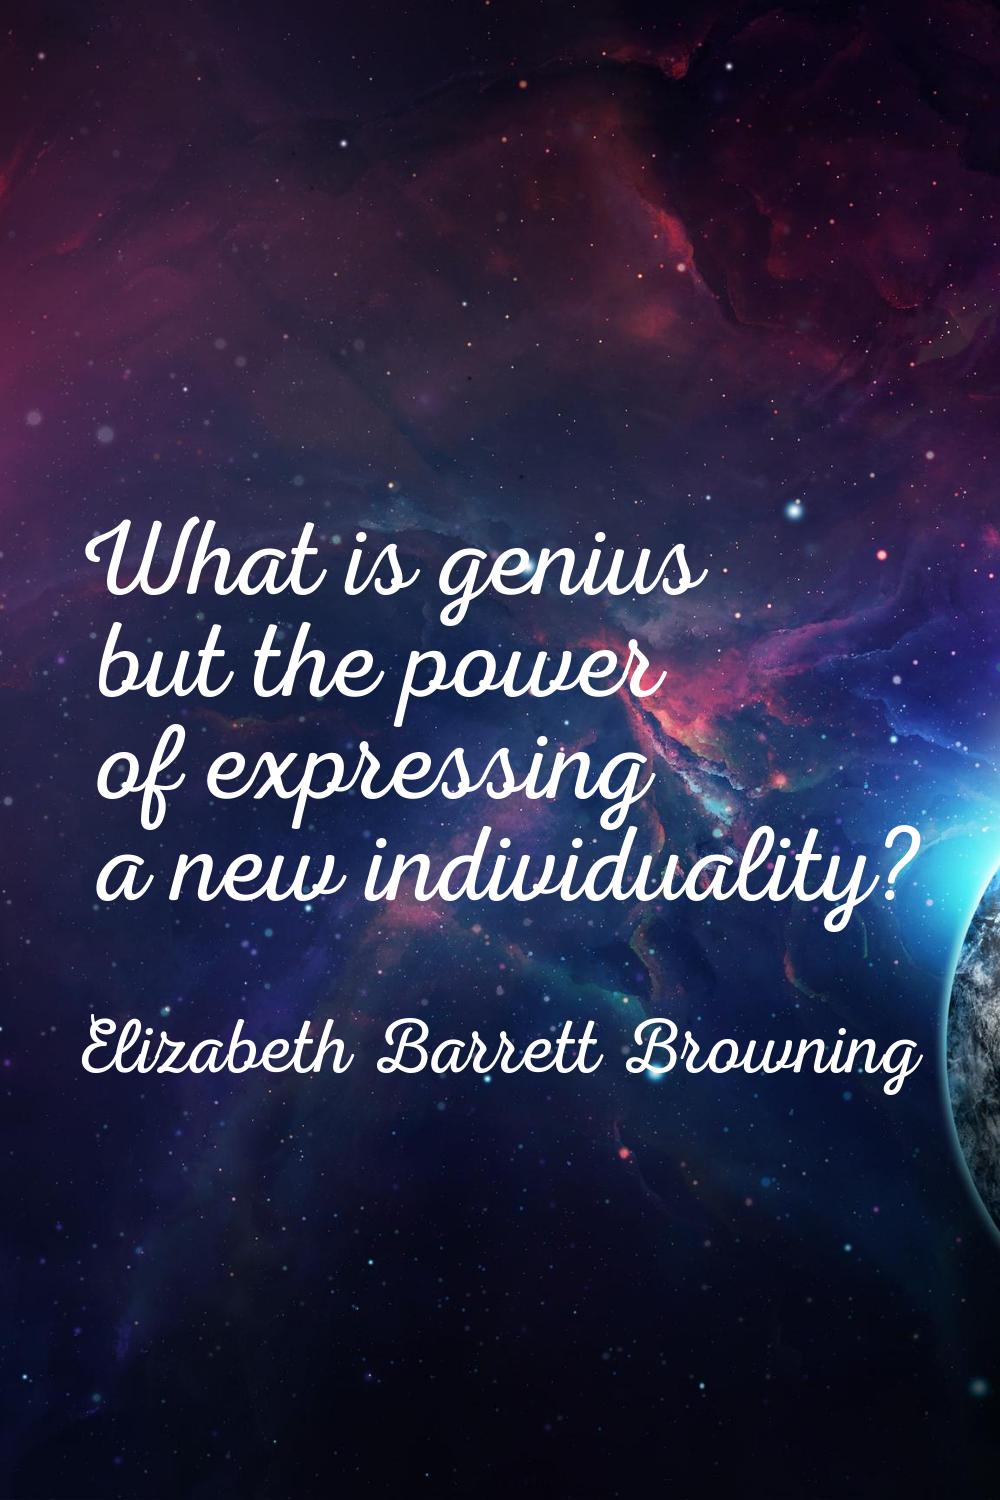 What is genius but the power of expressing a new individuality?